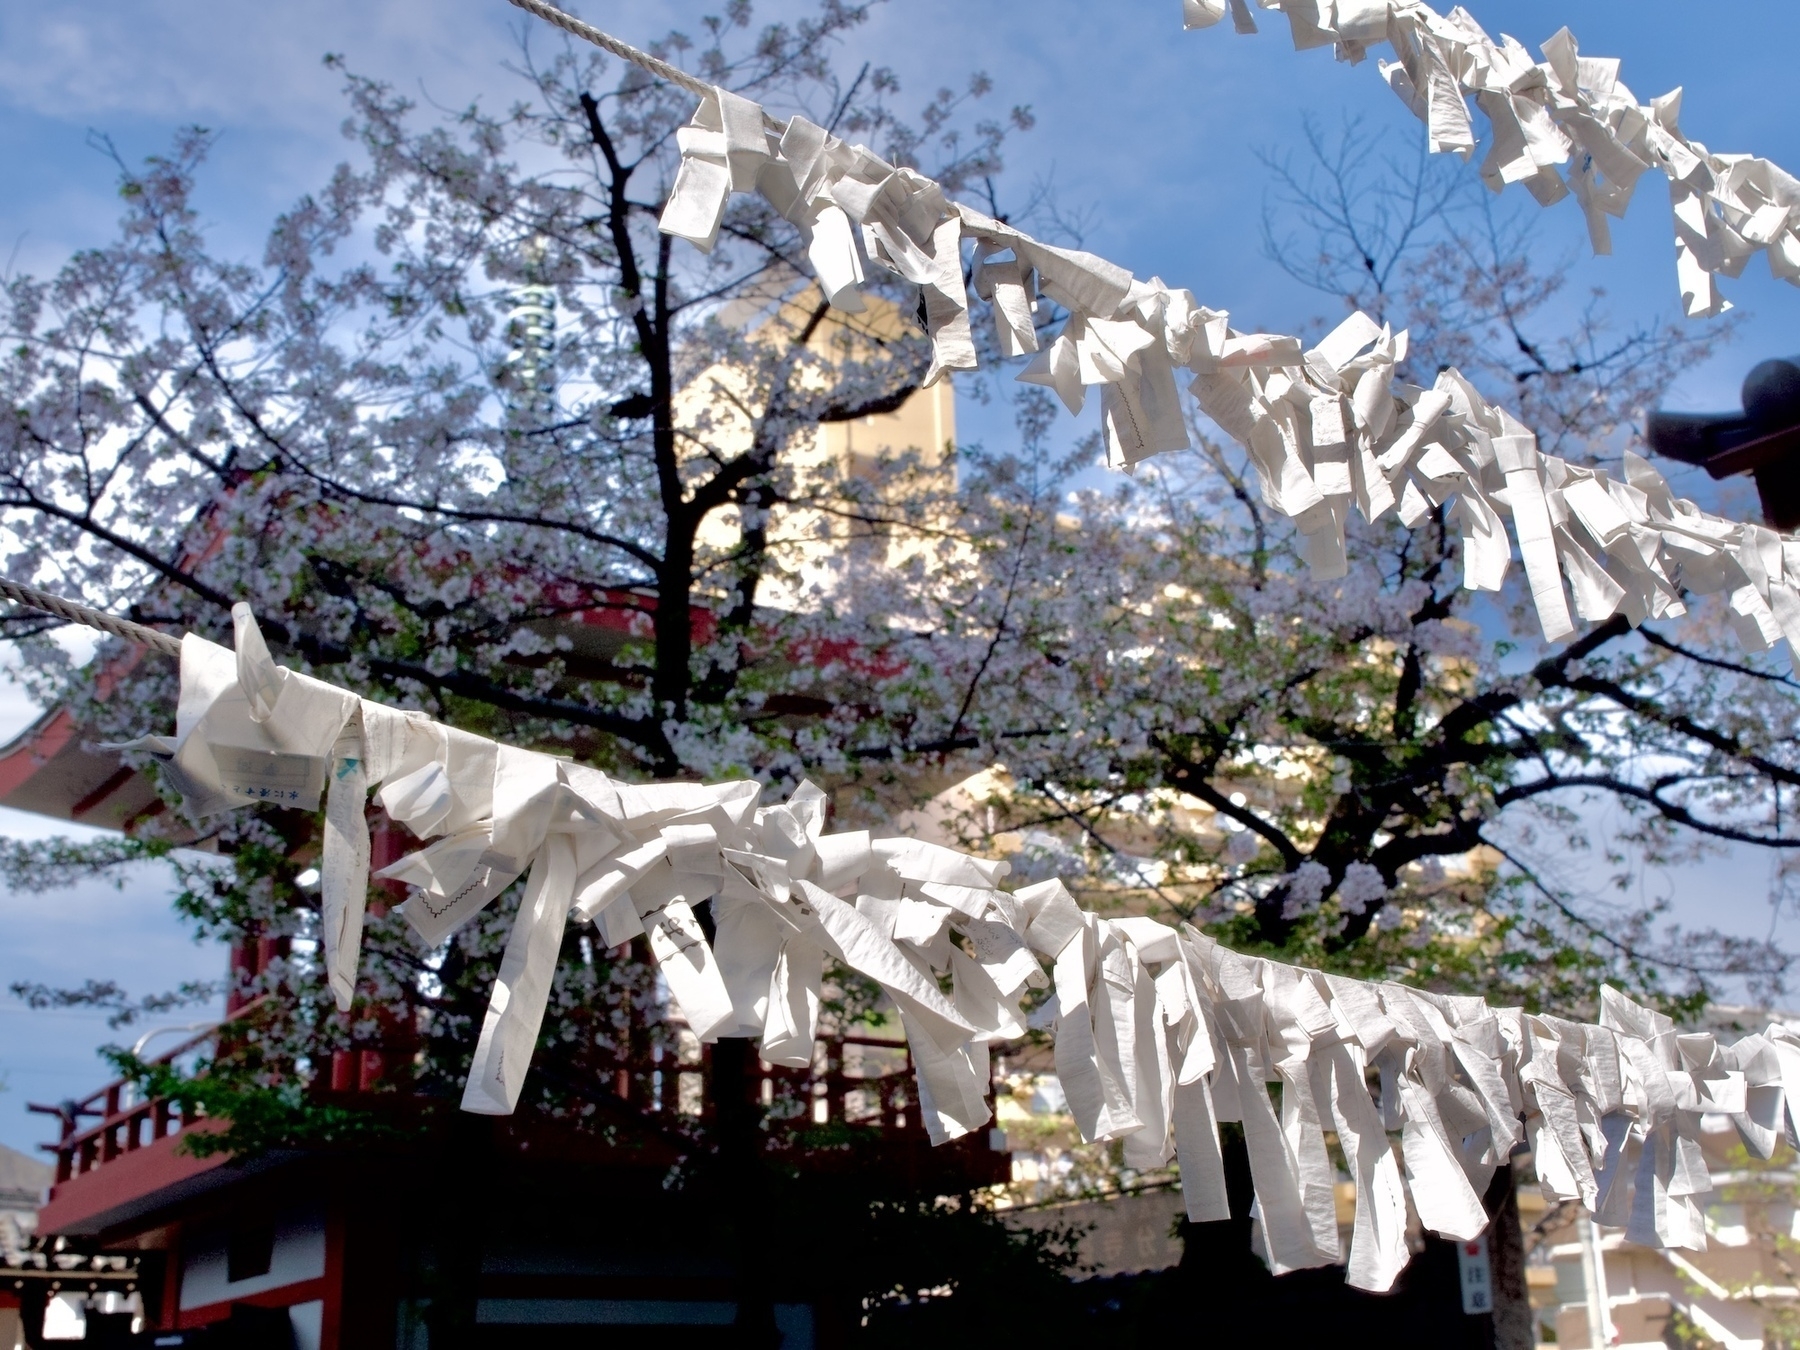 Fortune slips knotted on lines at a temple. In the background a sakura tree and belltower